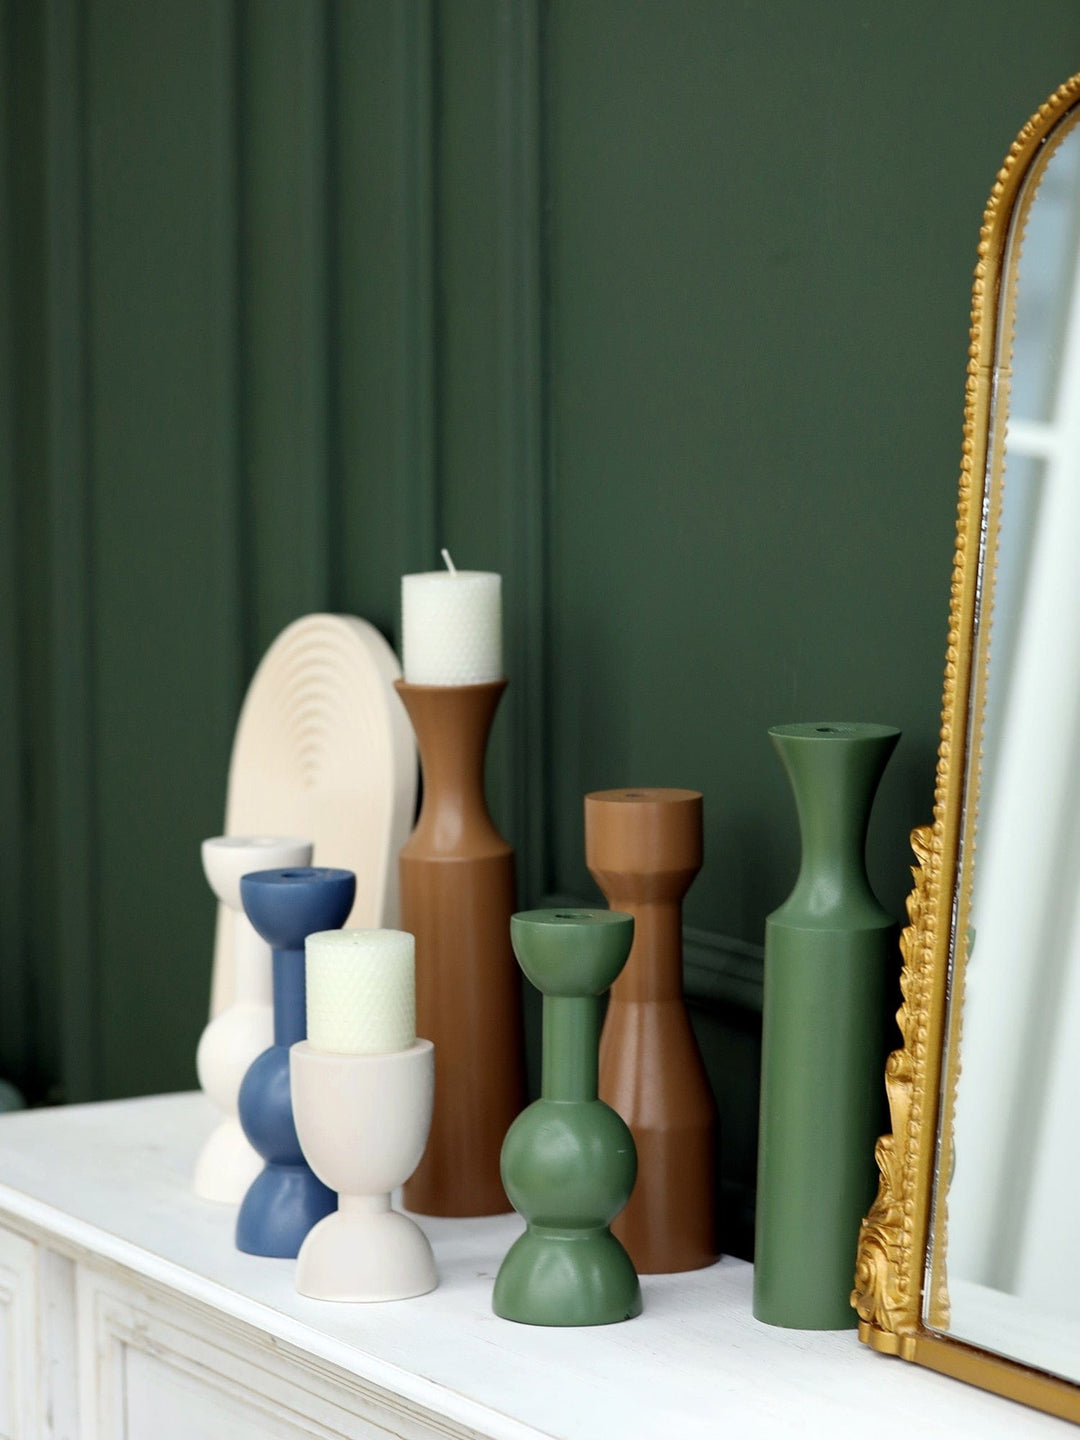 Some colorful hand painted candlestick holders placed on a white finish surface.